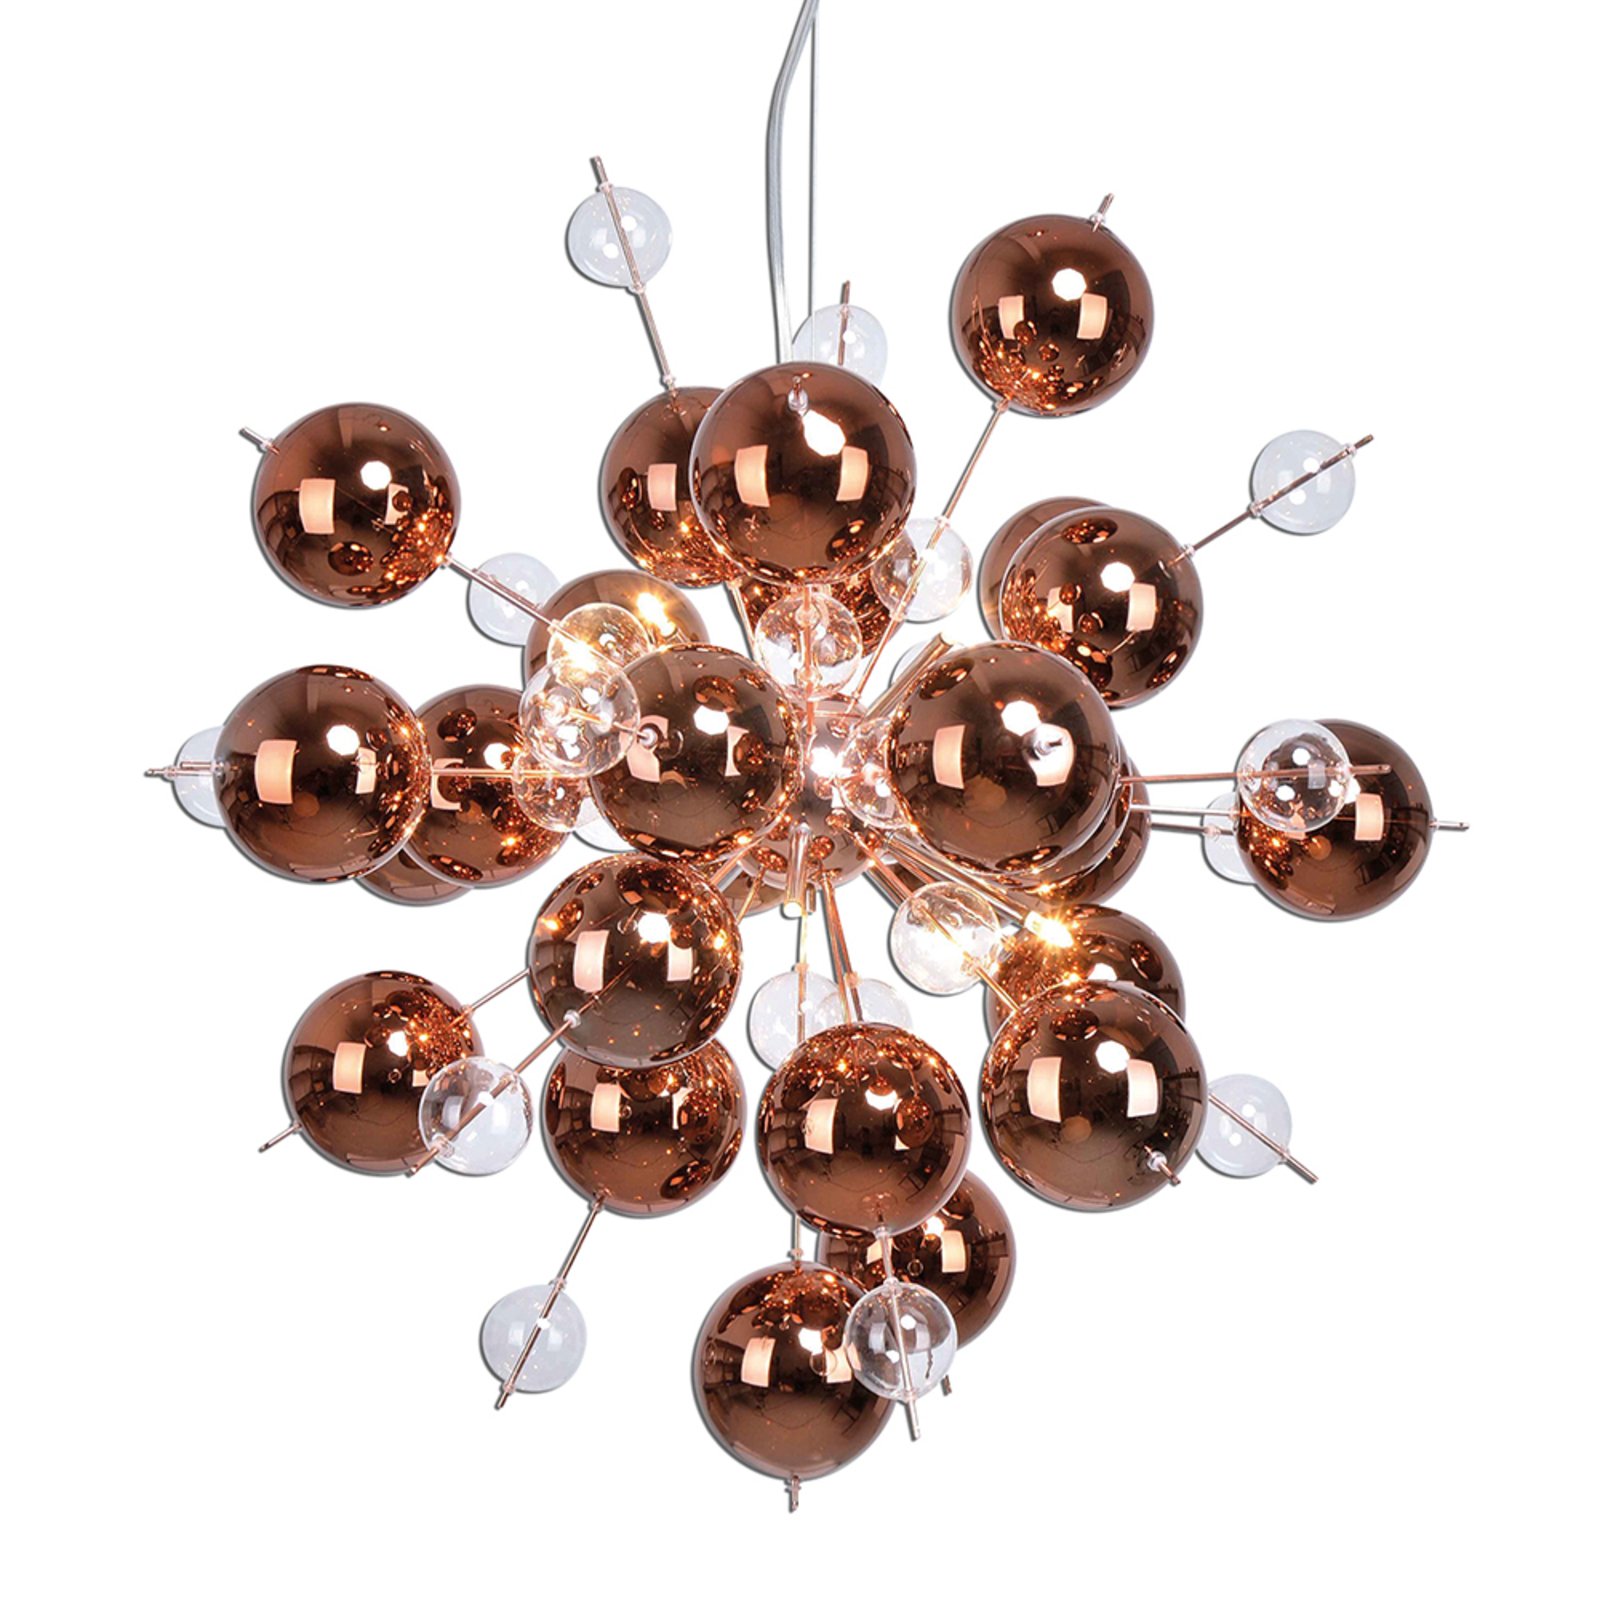 Explosion - pendant light with copper spheres